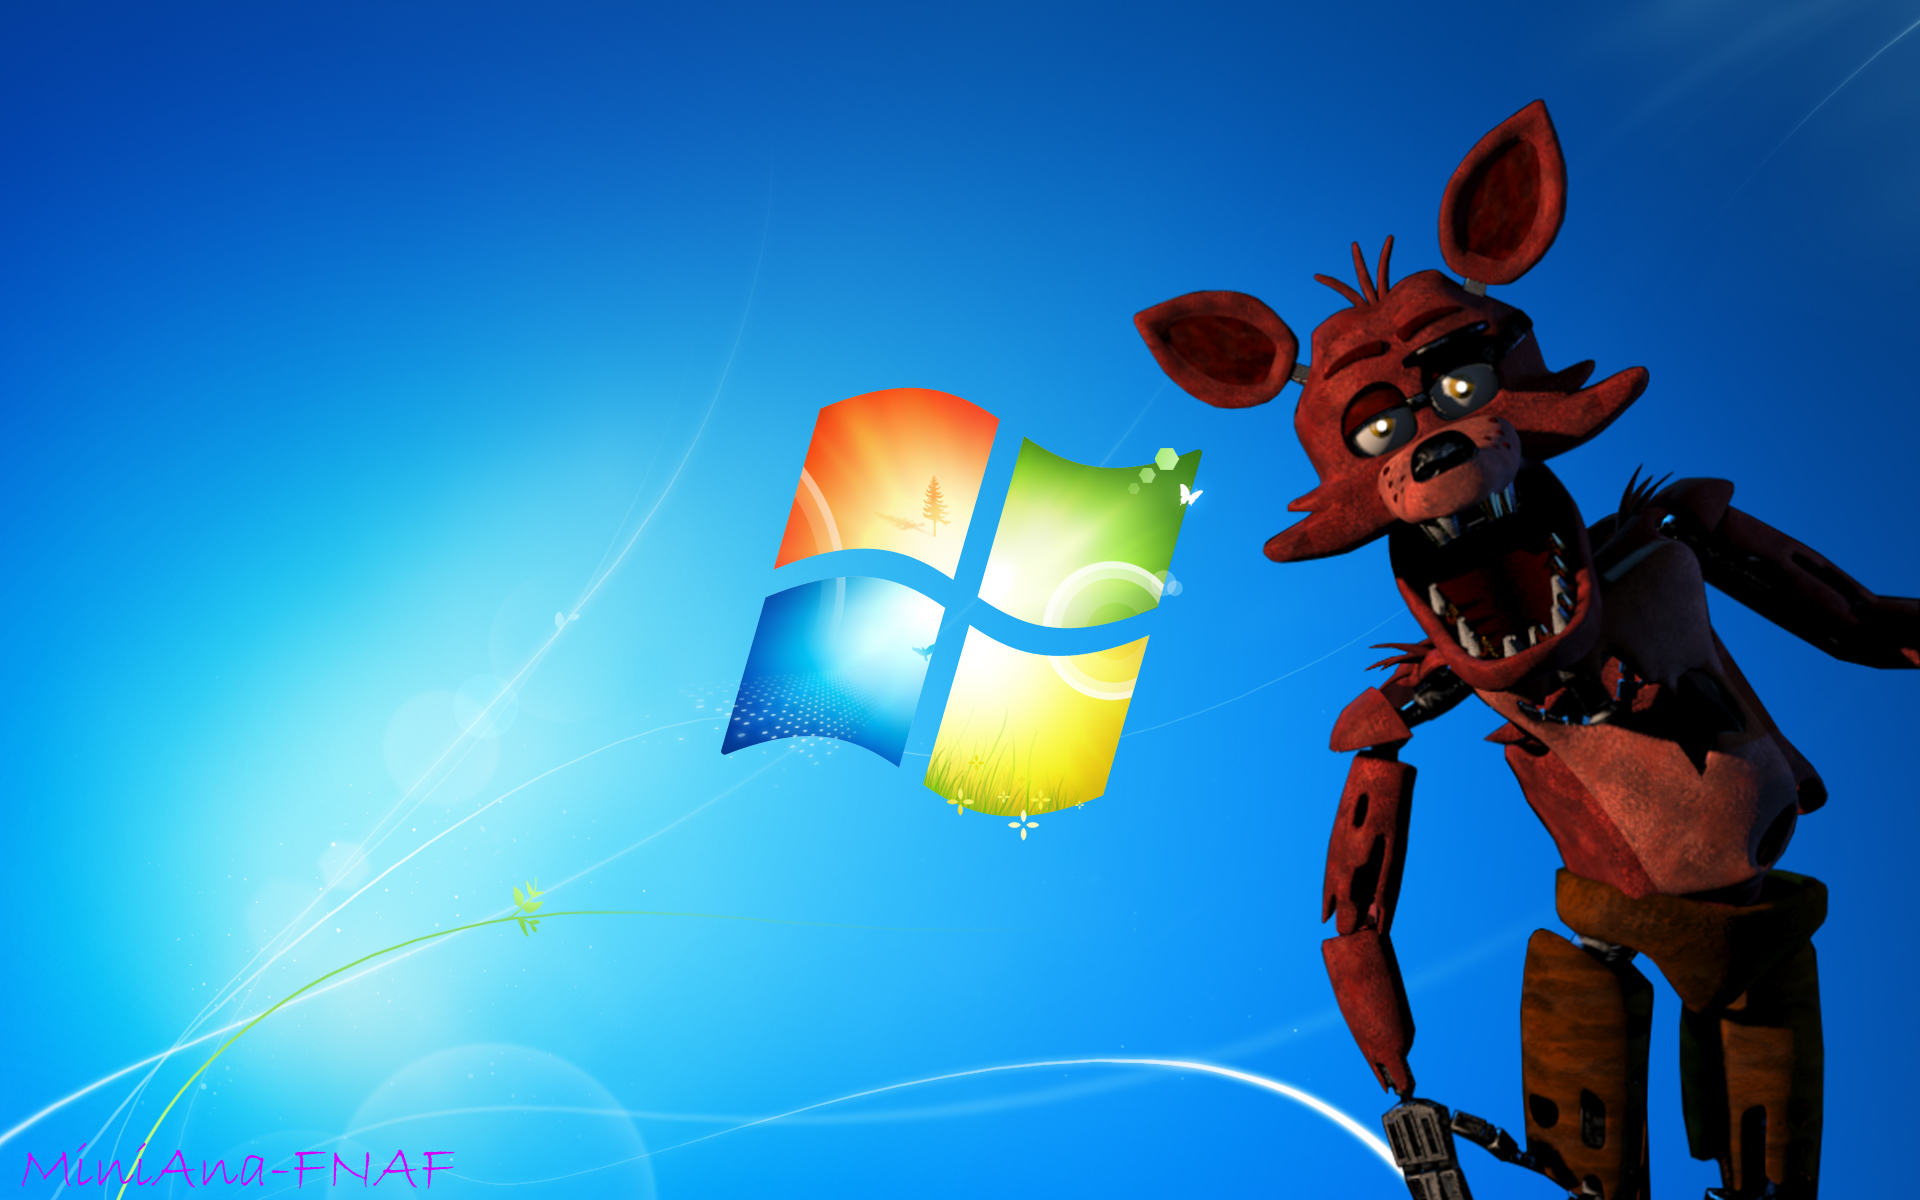 Five Nights at Freddys Wallpapers 81 pictures